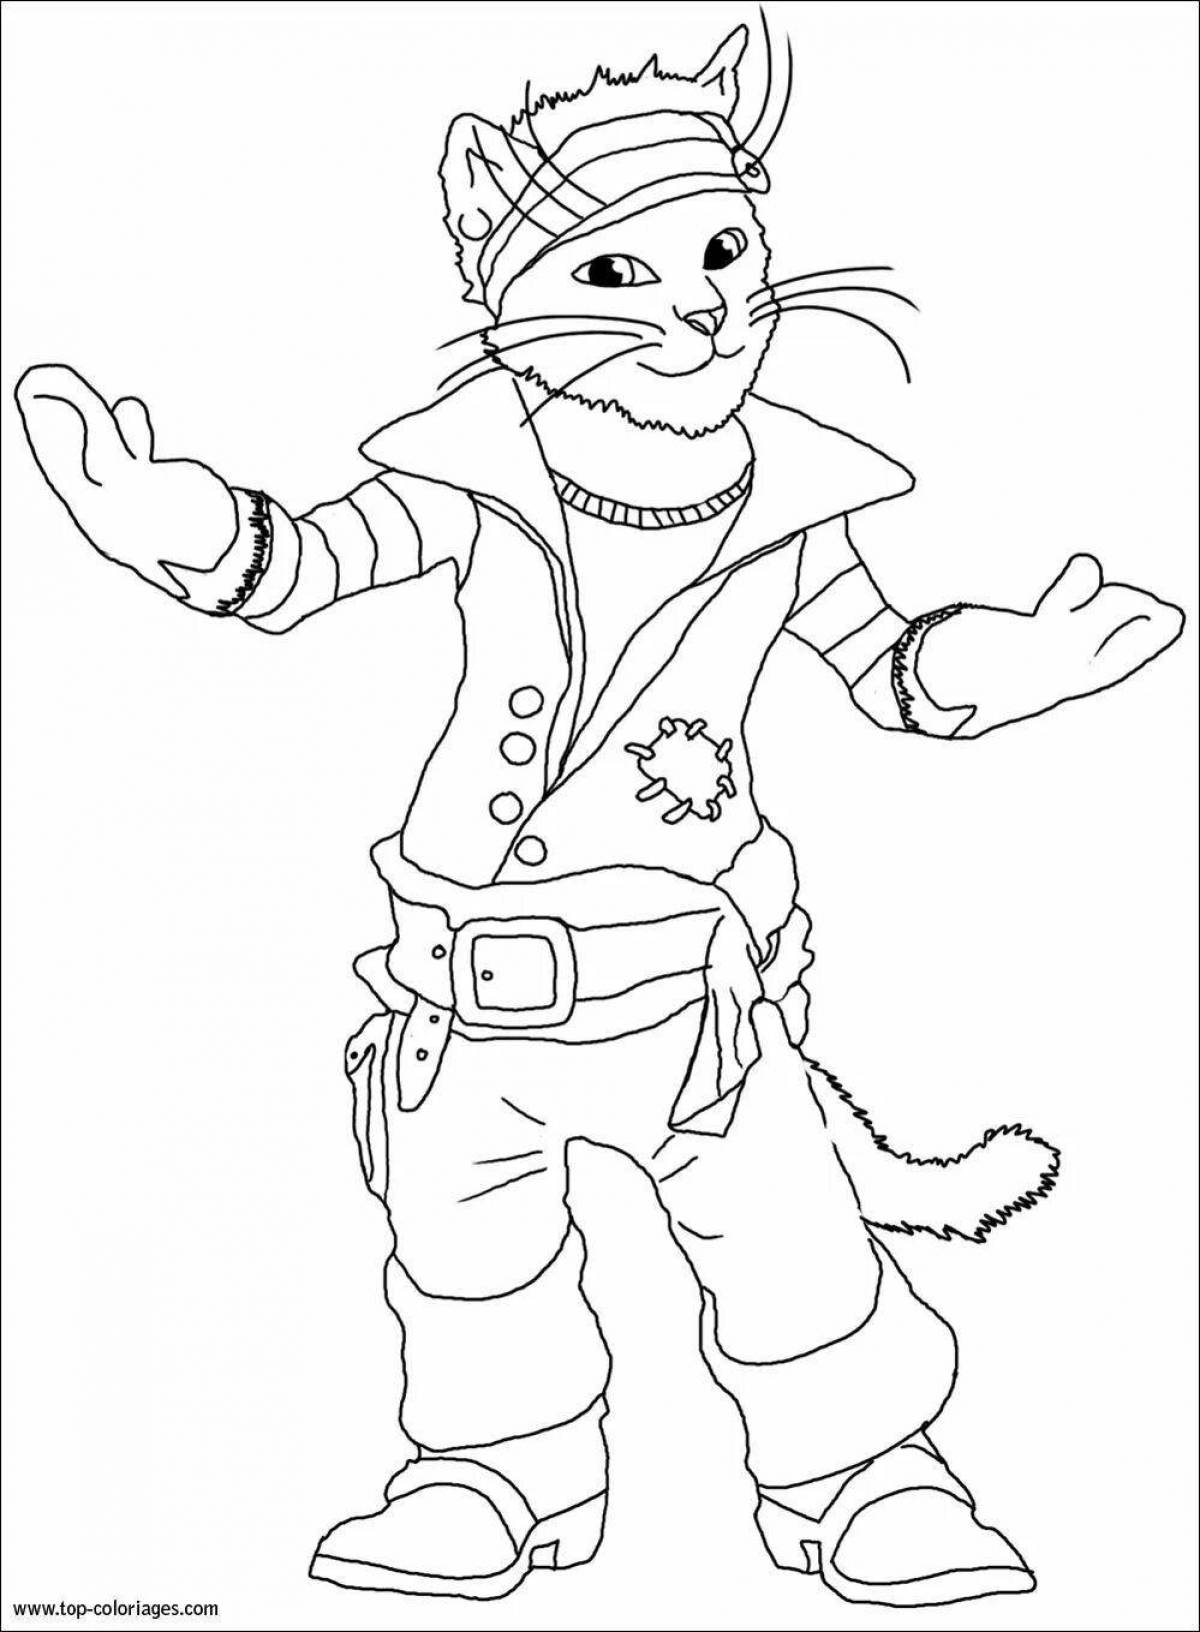 Coloring page of the mesmerizing Puss in Boots